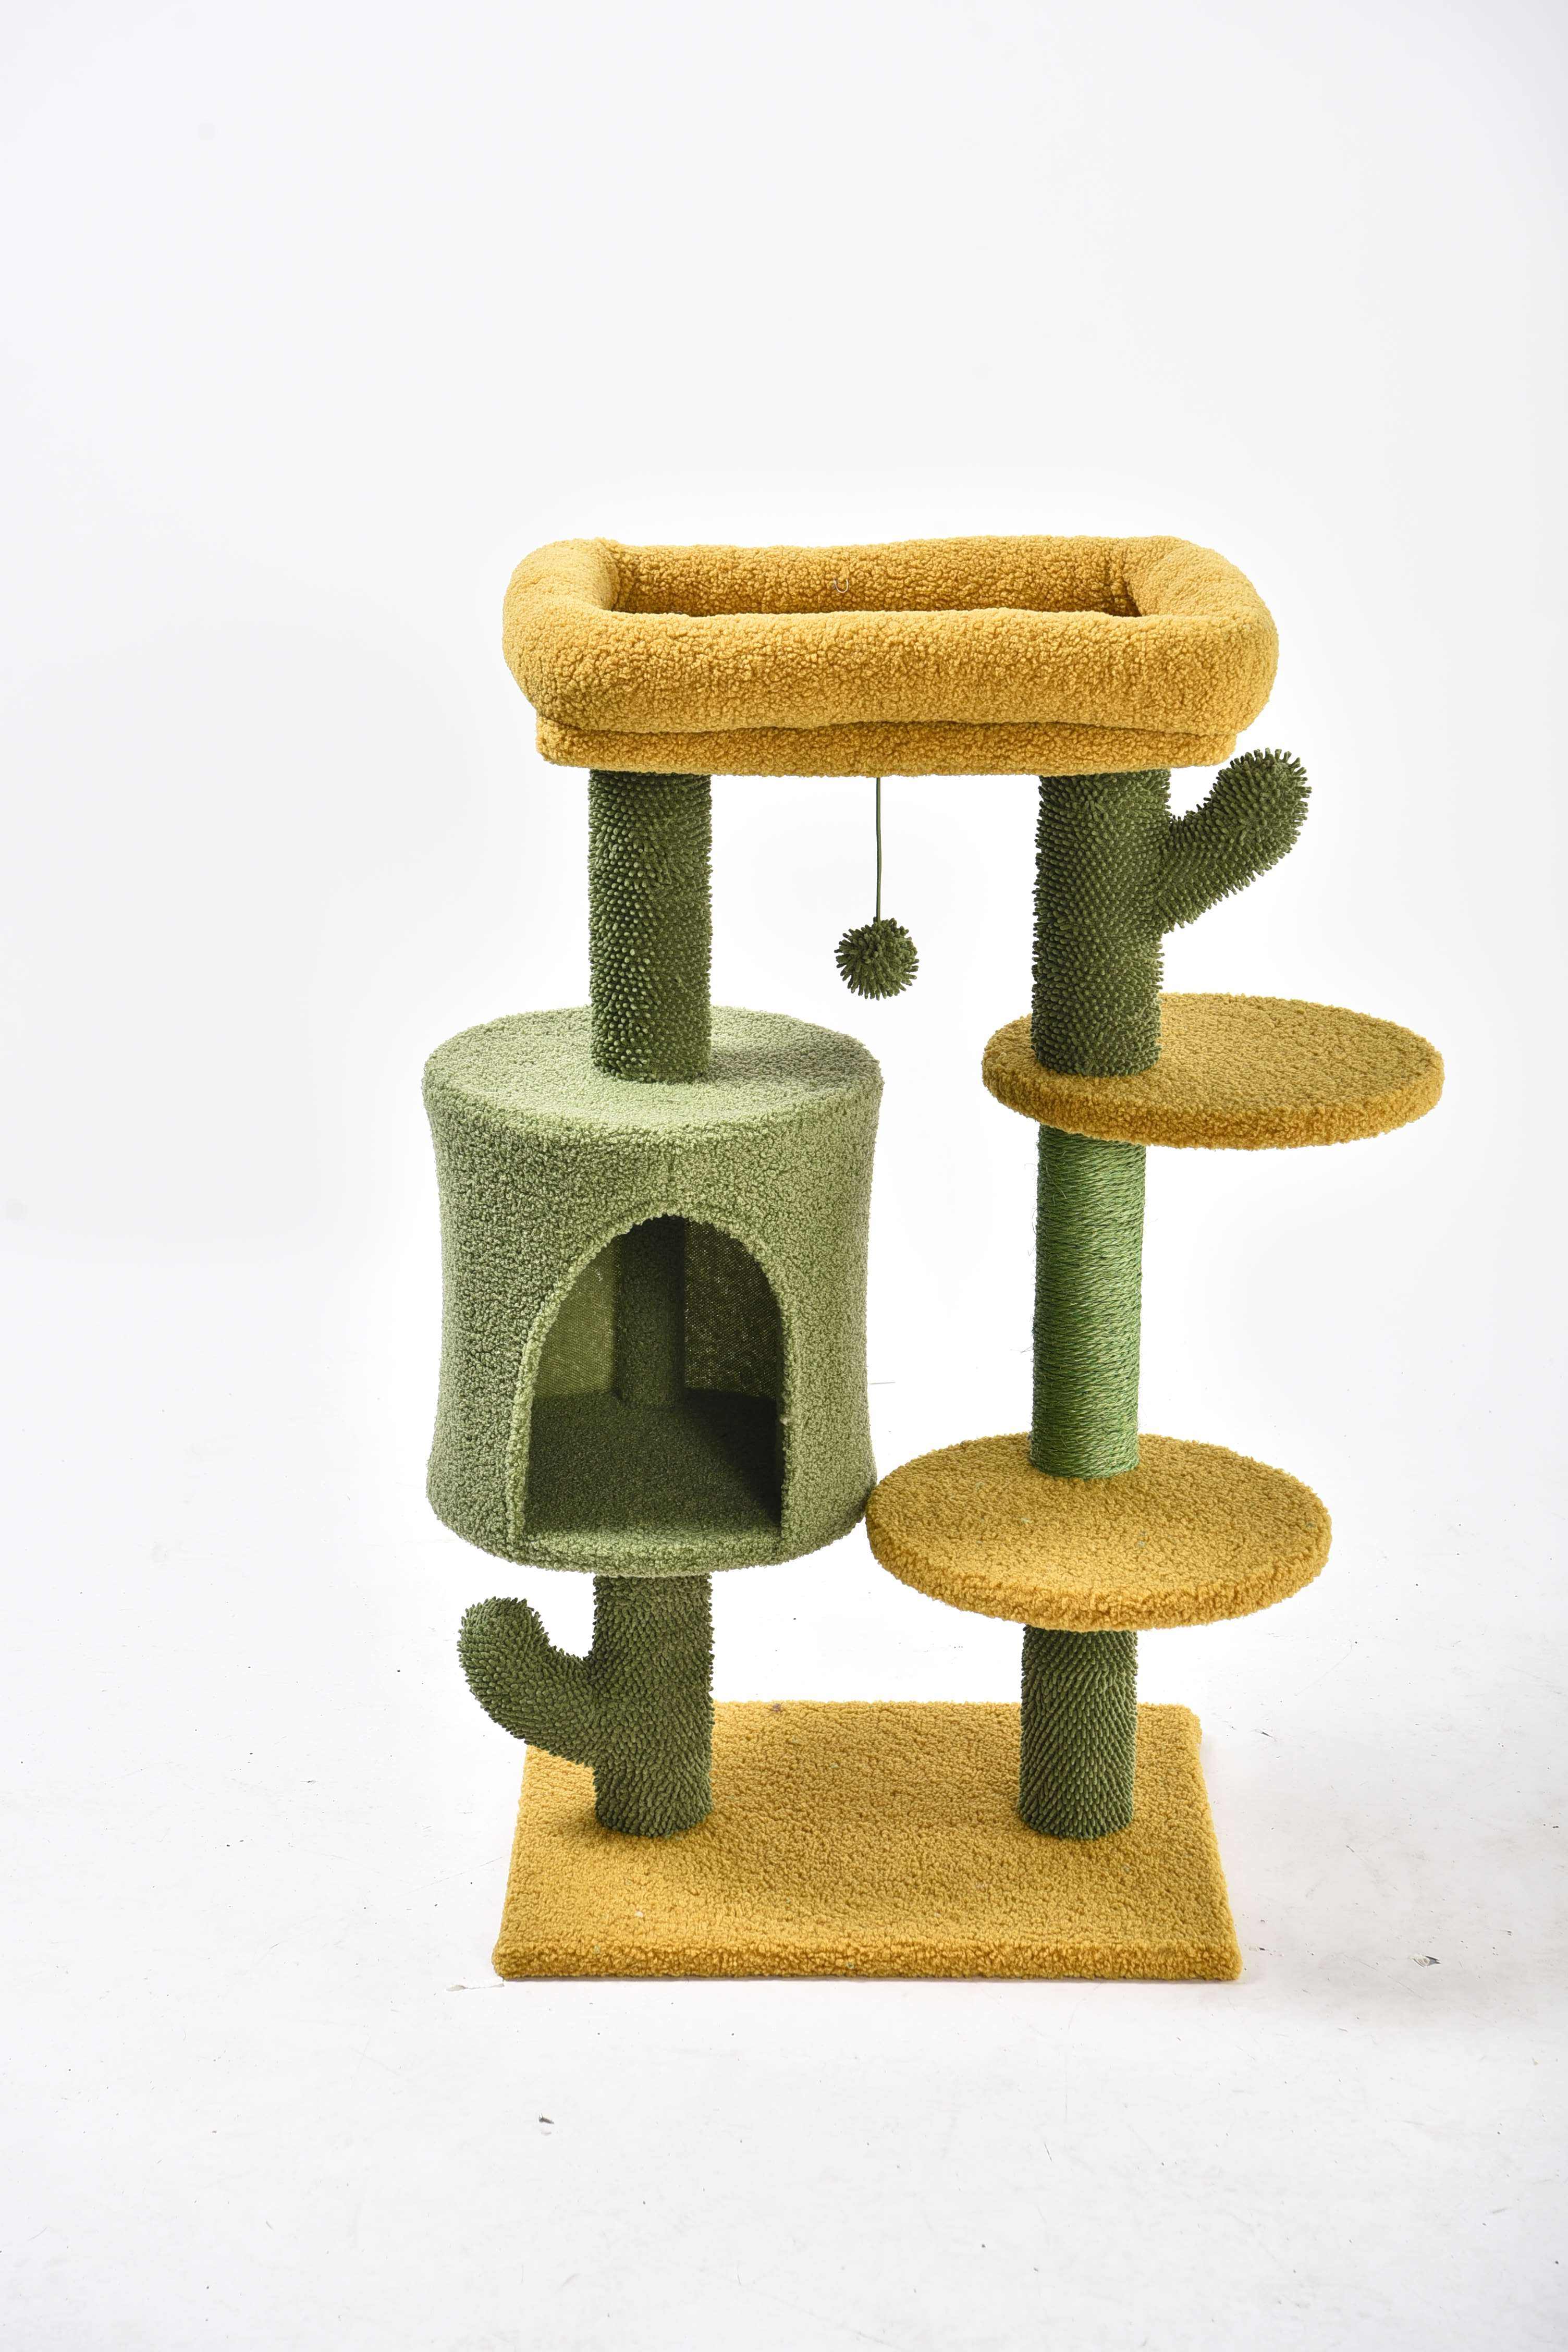 Petstar Cactus Scratching Post with Condo And Playball